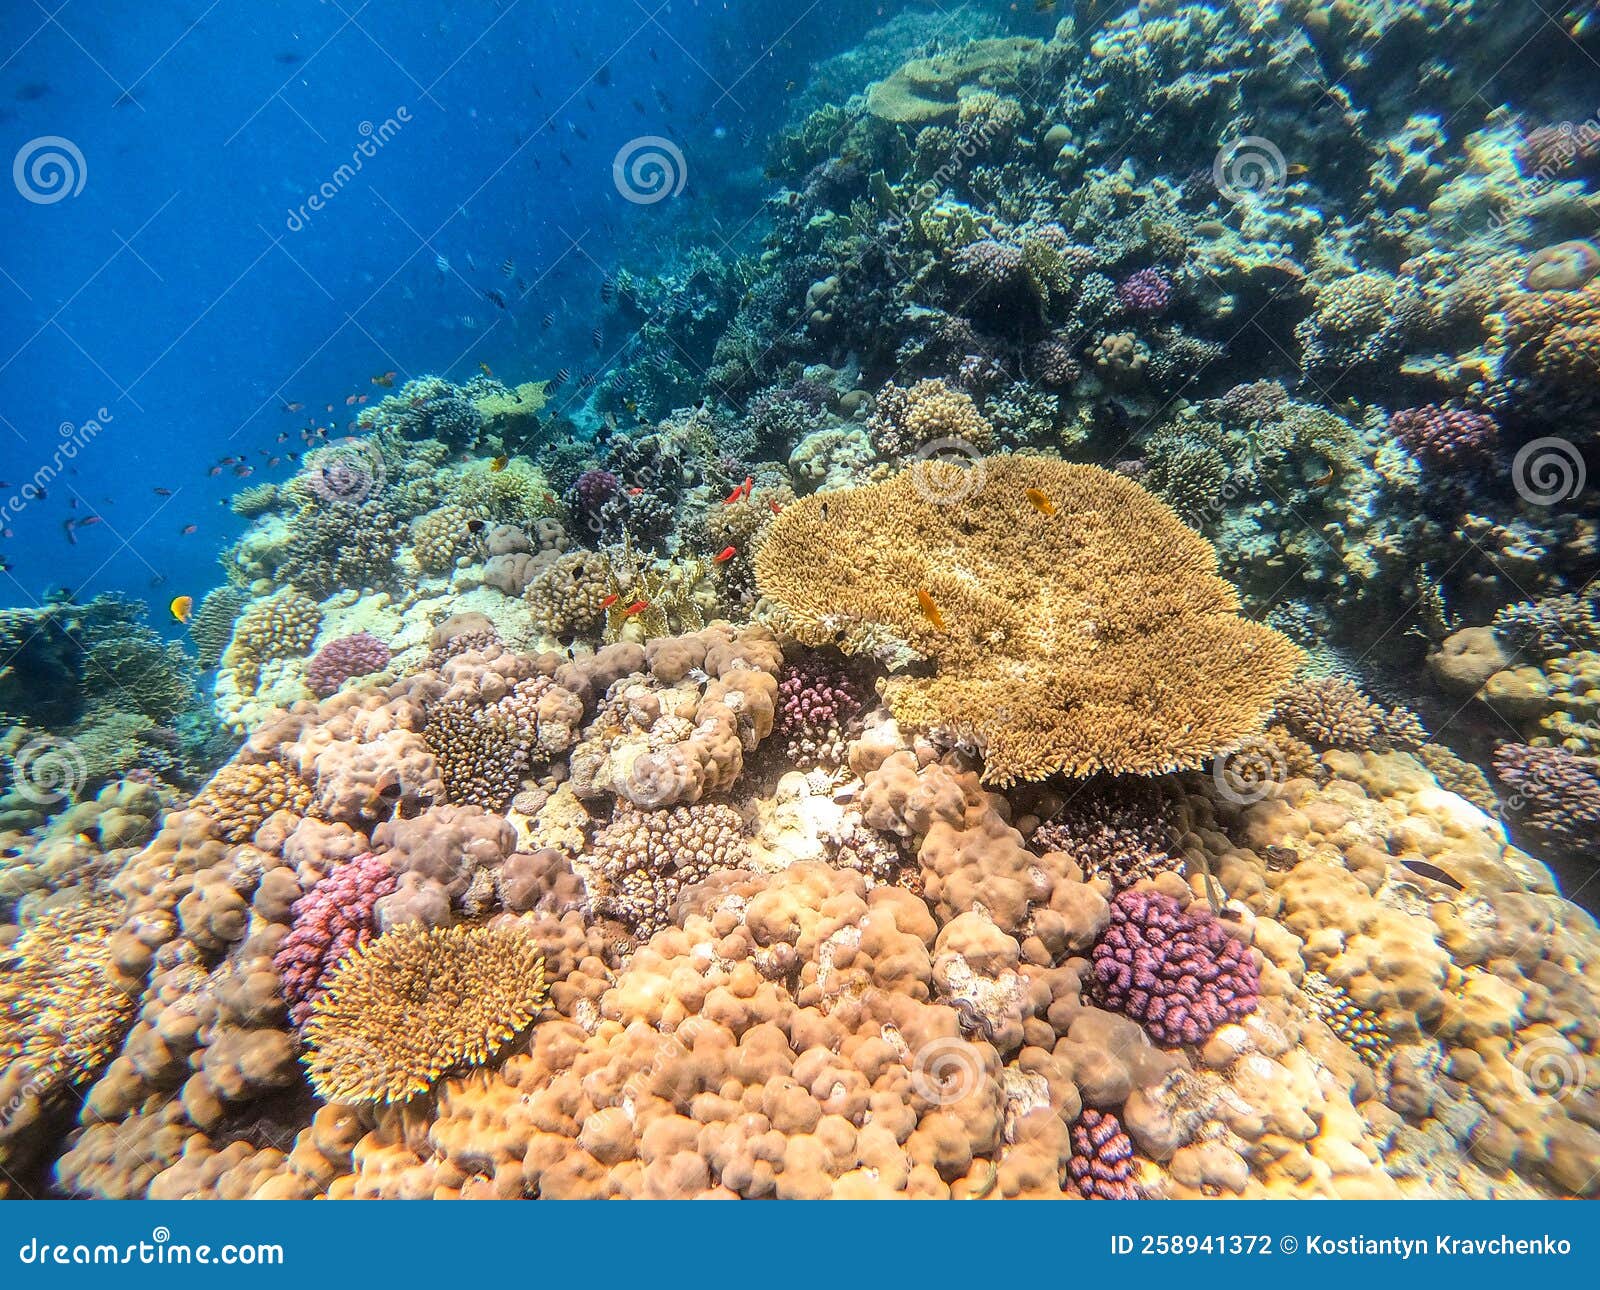 Underwater Life of Reef with Corals, Shoal of Lyretail Anthias ...